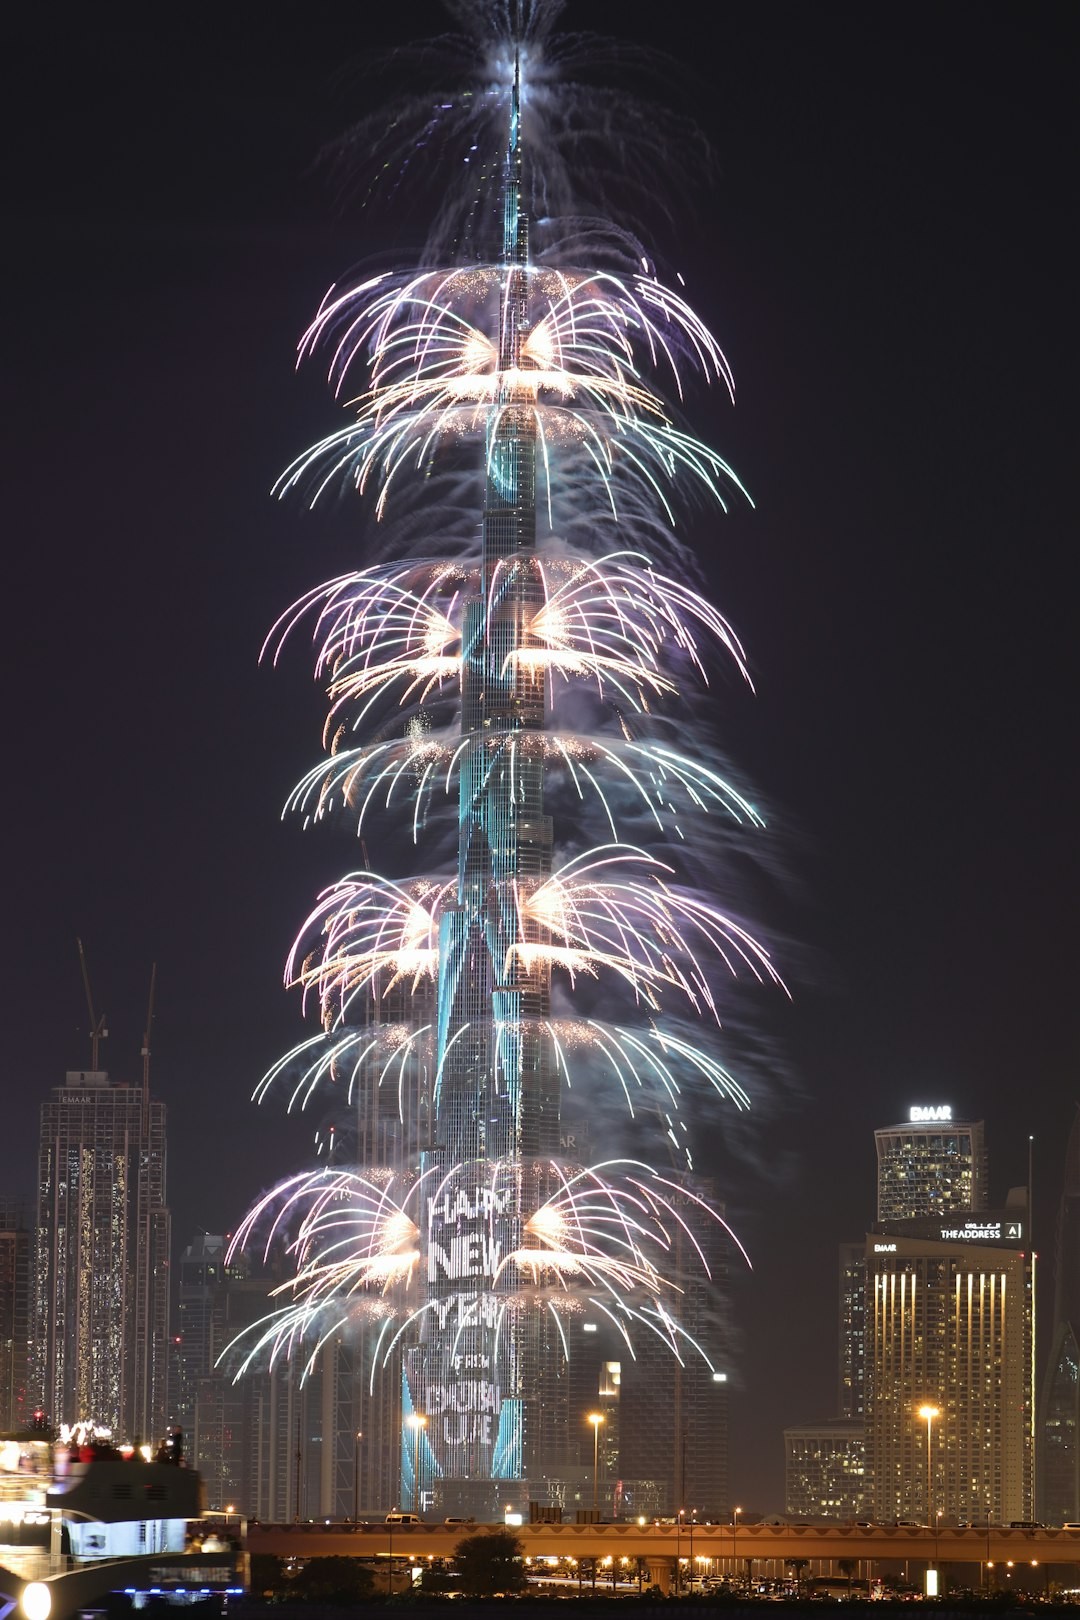 Burj Khalifa with a lot of fireworks in the sky on new year